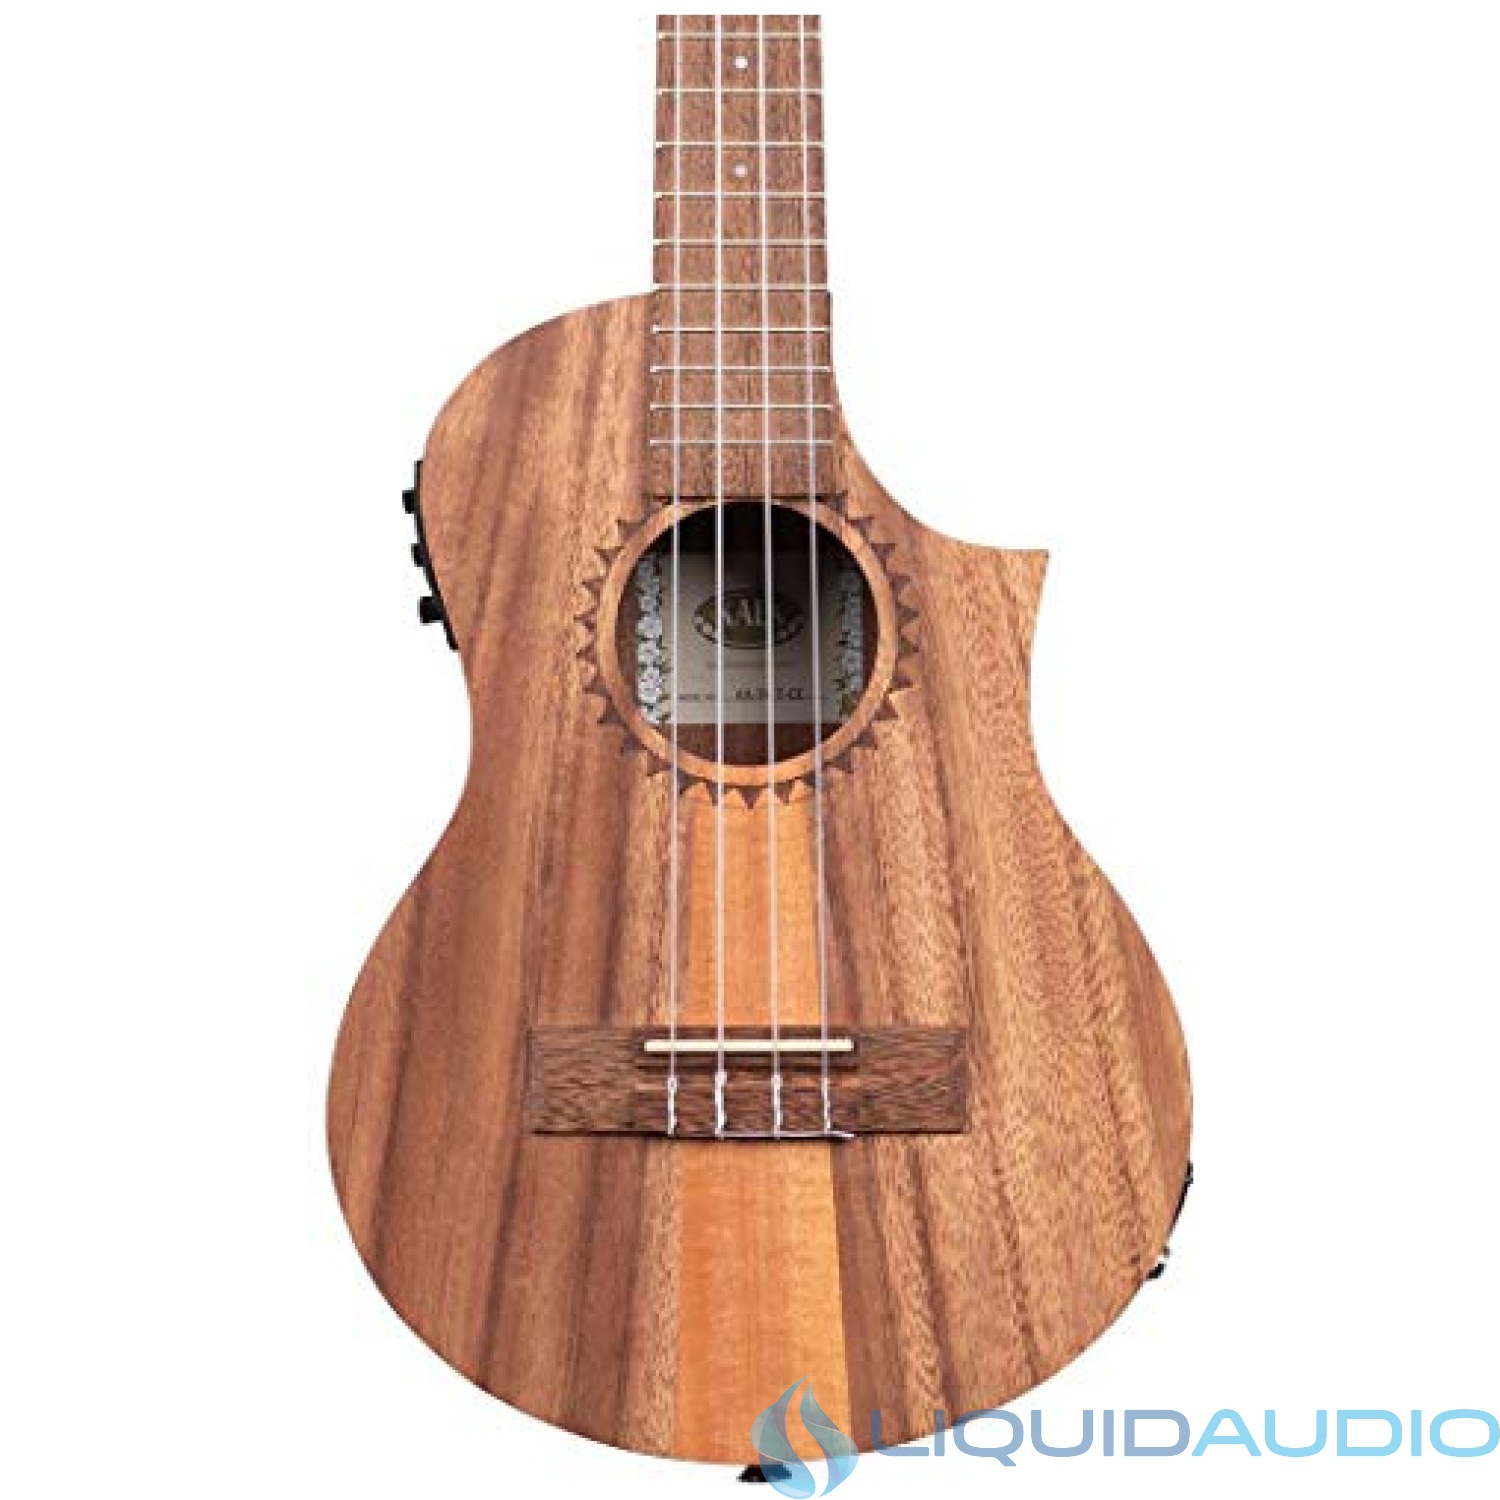 KALA Teak Tri-Top Tenor Ukulele with CUTAWAY & EQ Built-In Pickup and Tuner Padded Gig Bag (Not Included)